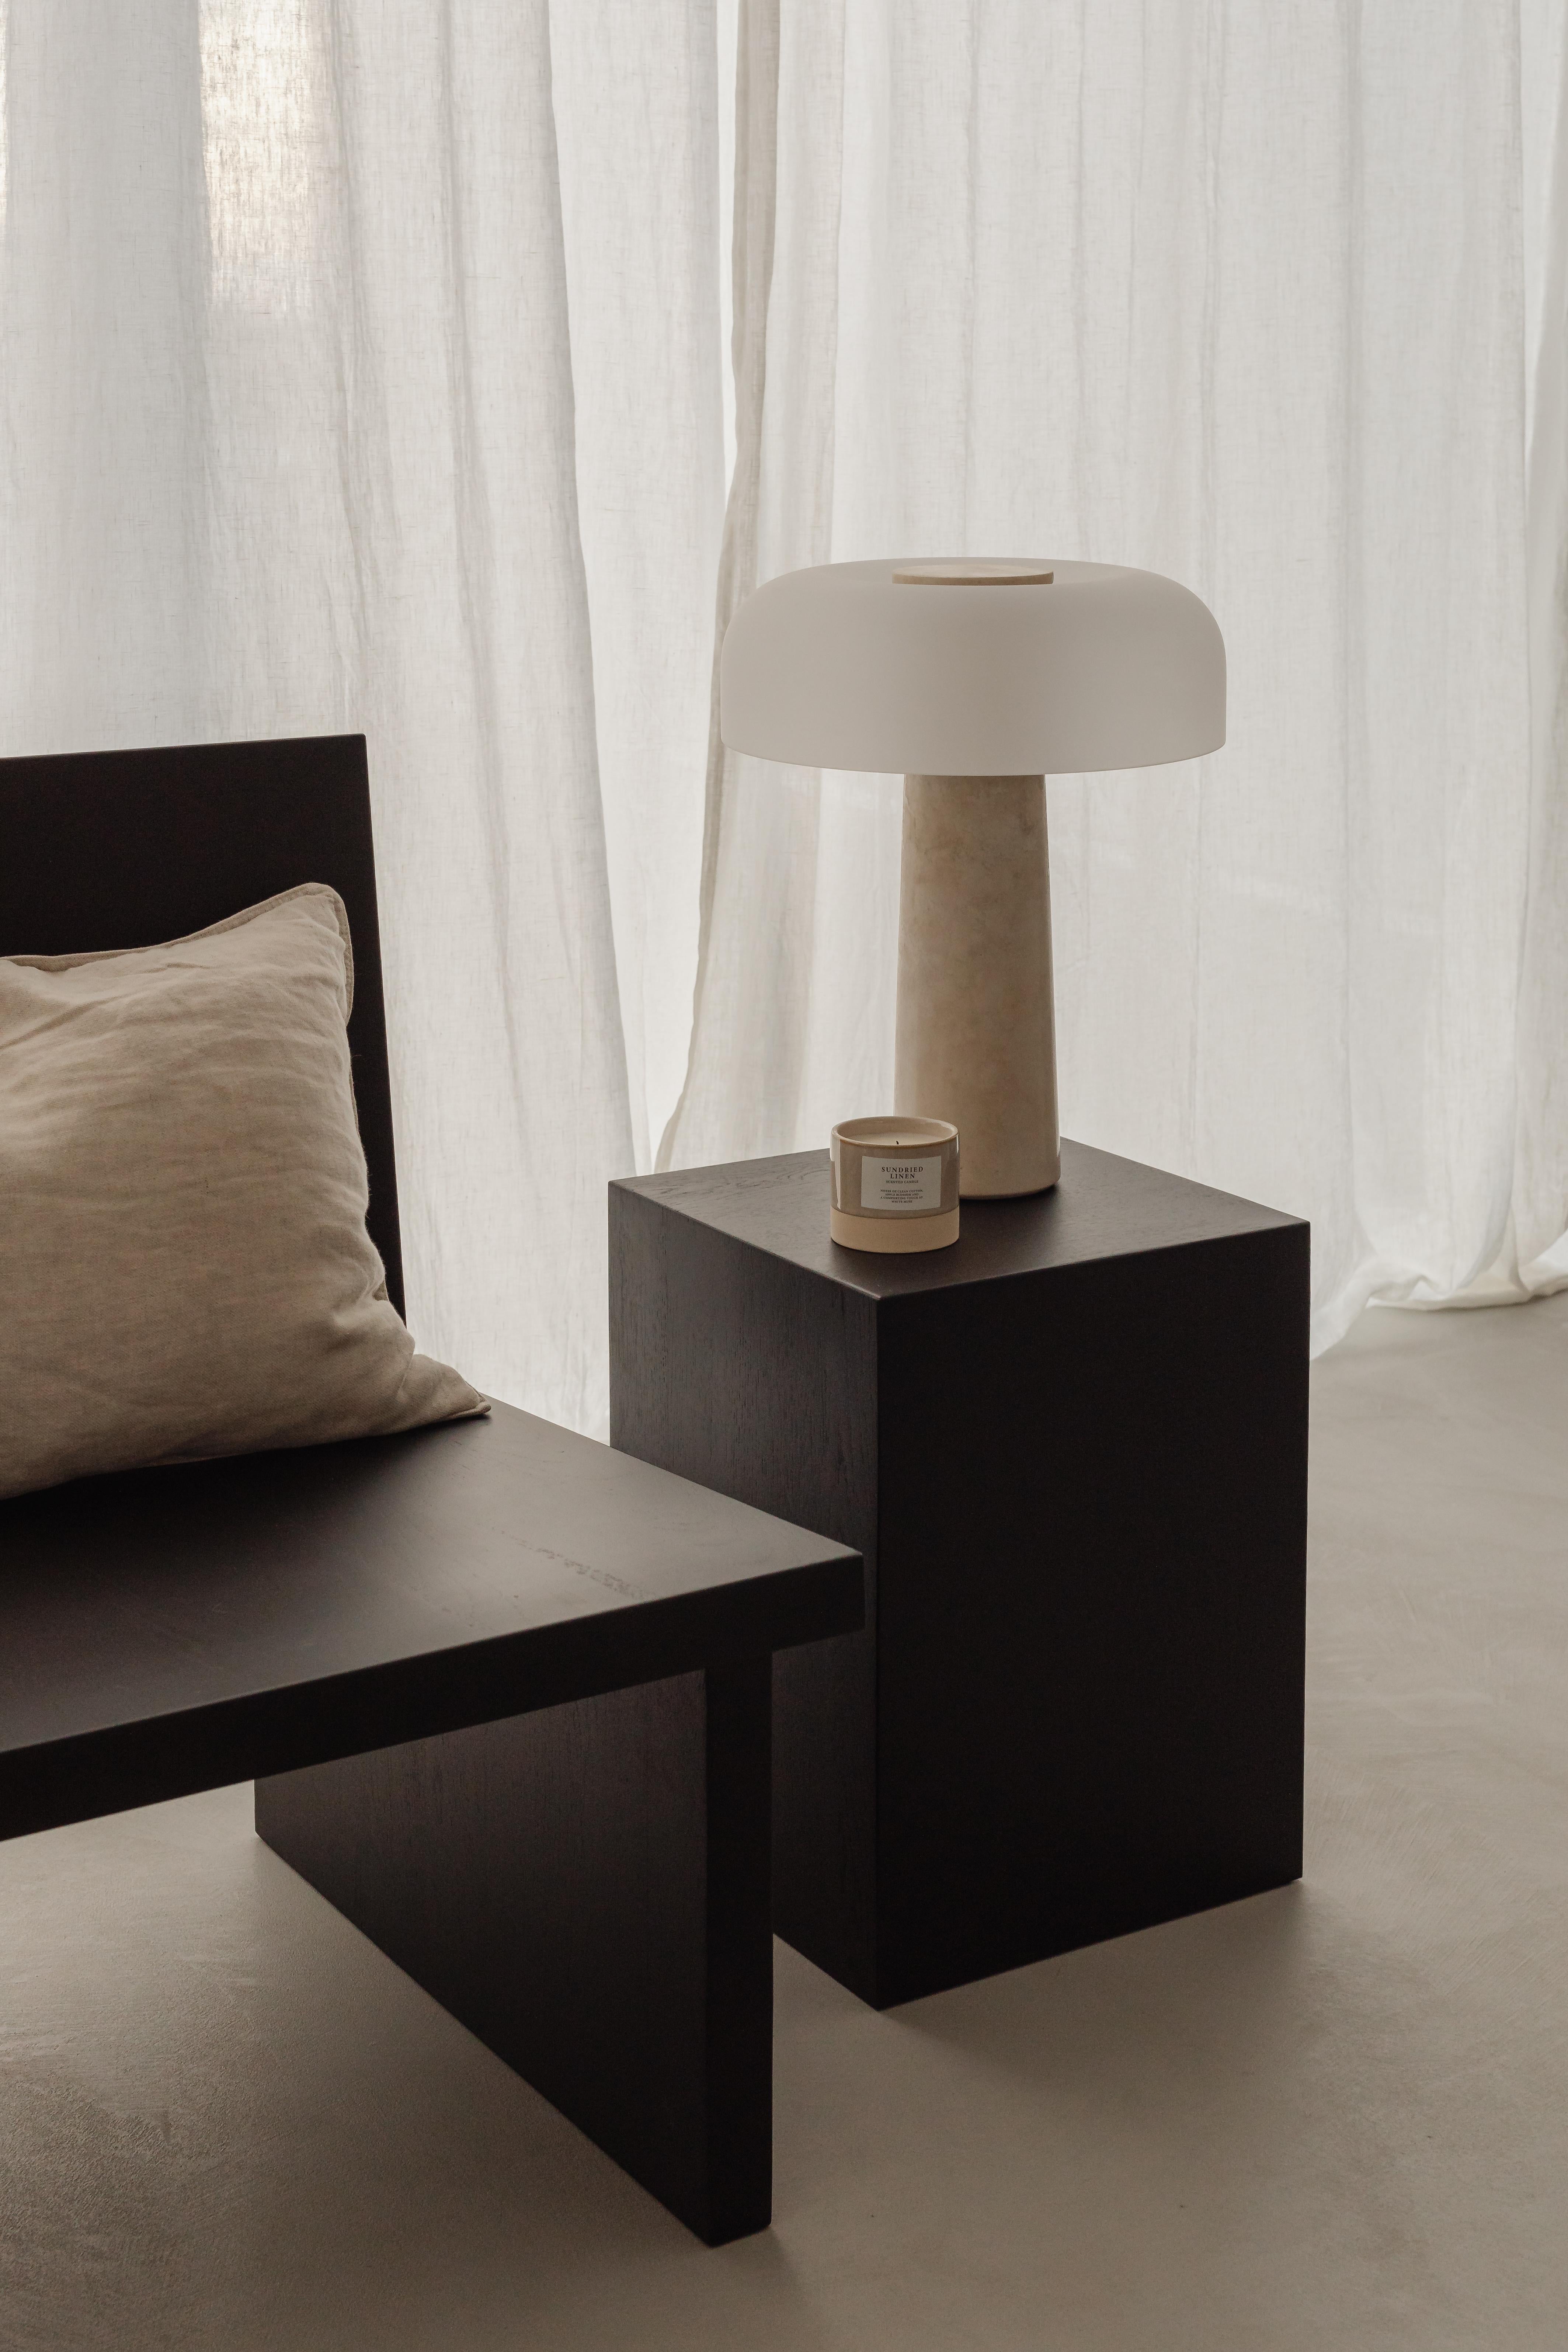 COI is a minimalist and elegant piece of furniture with many functions. It can be a bedside table, side table or seat. You can put a vase or your favourite lamp on it. Its simple design draws attention to the beauty of the material and the precision